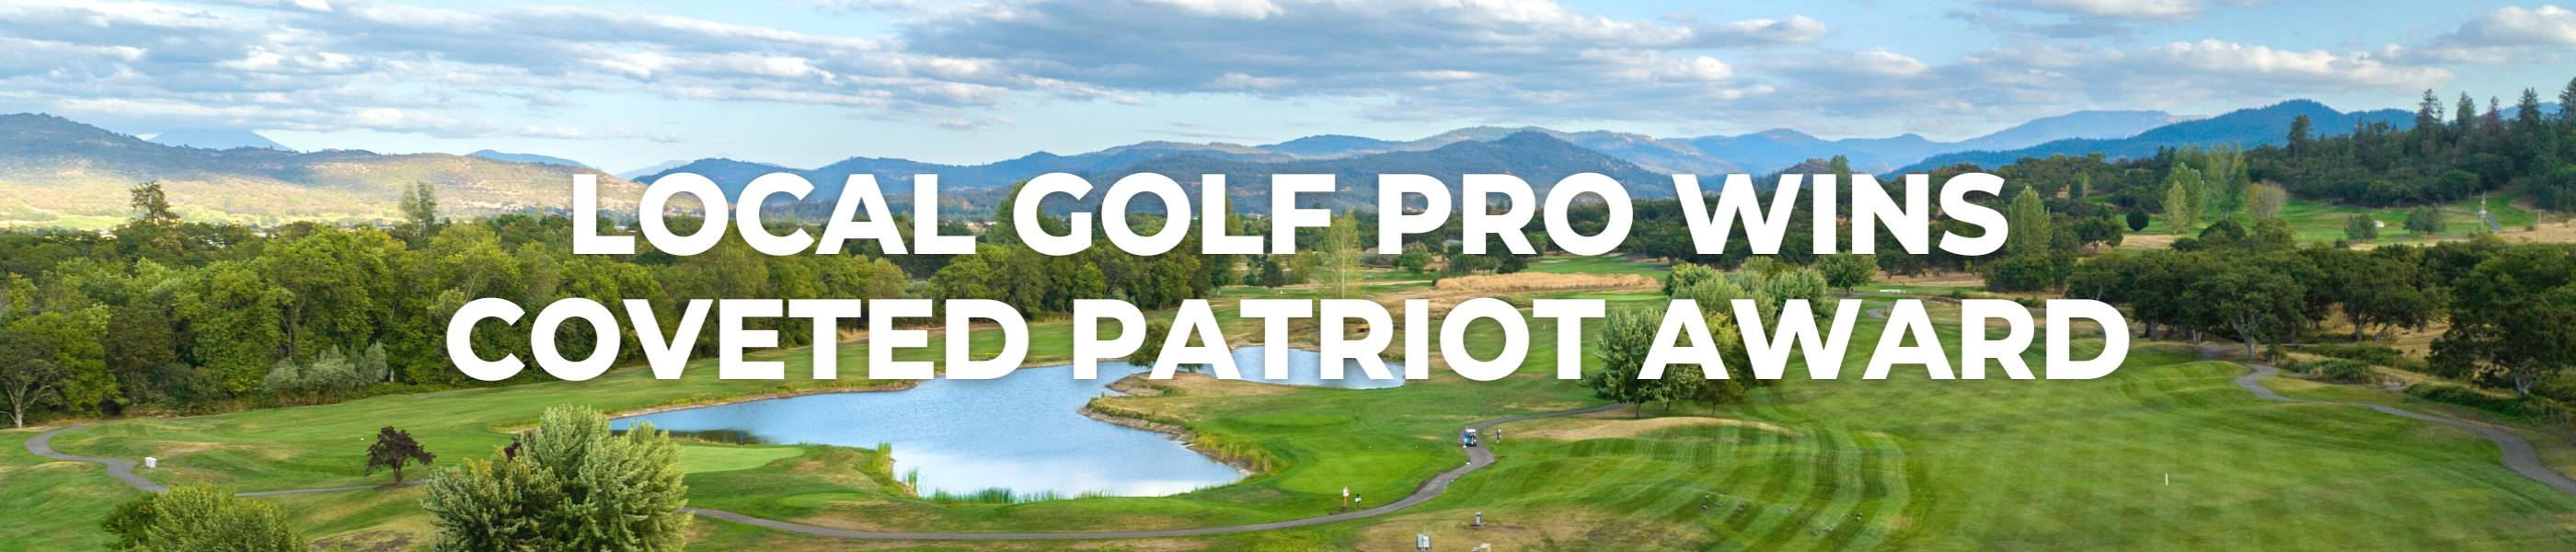 Local Golf Pro Wins Coveted Patriot Award